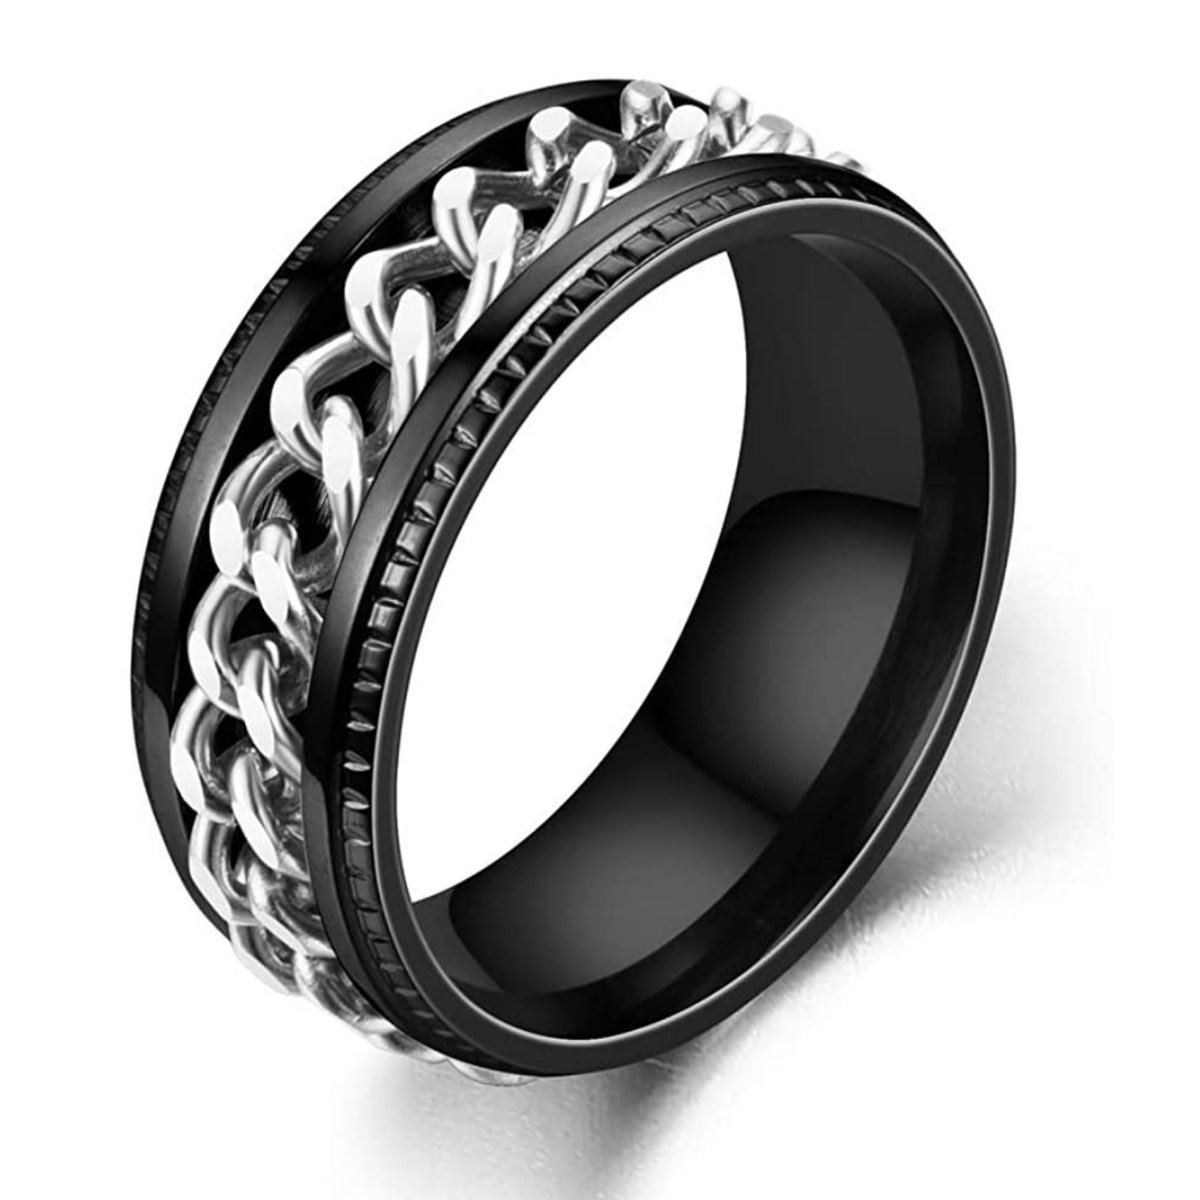 Anxiety Ring - (Ketting) - Stress Ring - Fidget Ring - Anxiety Ring For Finger - Draaibare Ring - Spinning Ring - Zwart-Zilver- (17.50mm / maat 55)